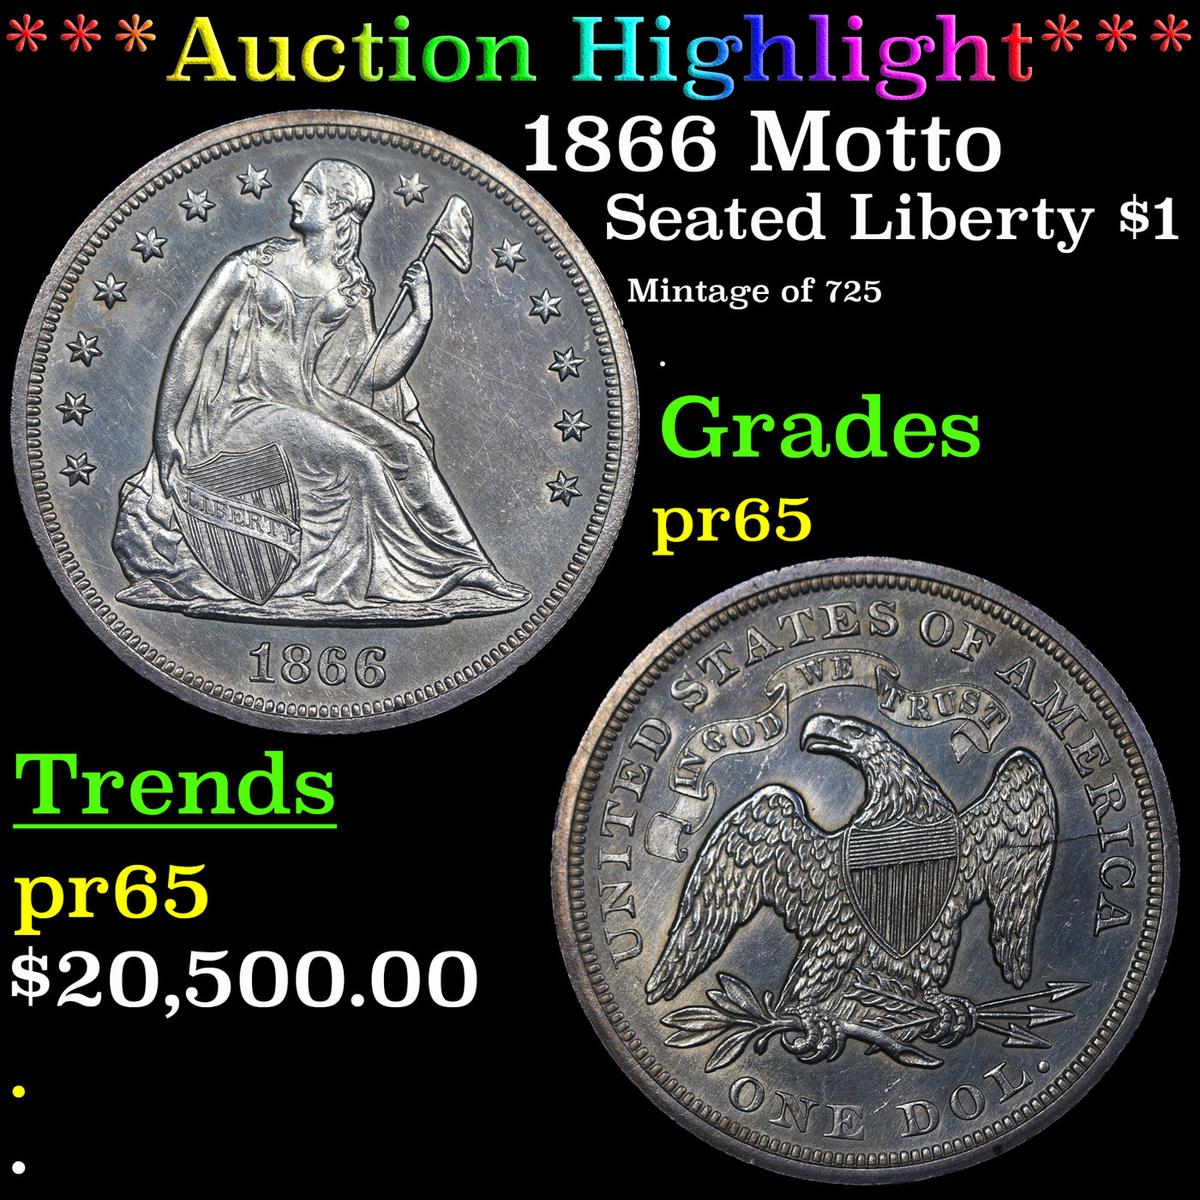 Proof ***Auction Highlight*** 1866 Motto Seated Liberty Dollar $1 Graded GEM Proof BY USCG (fc)